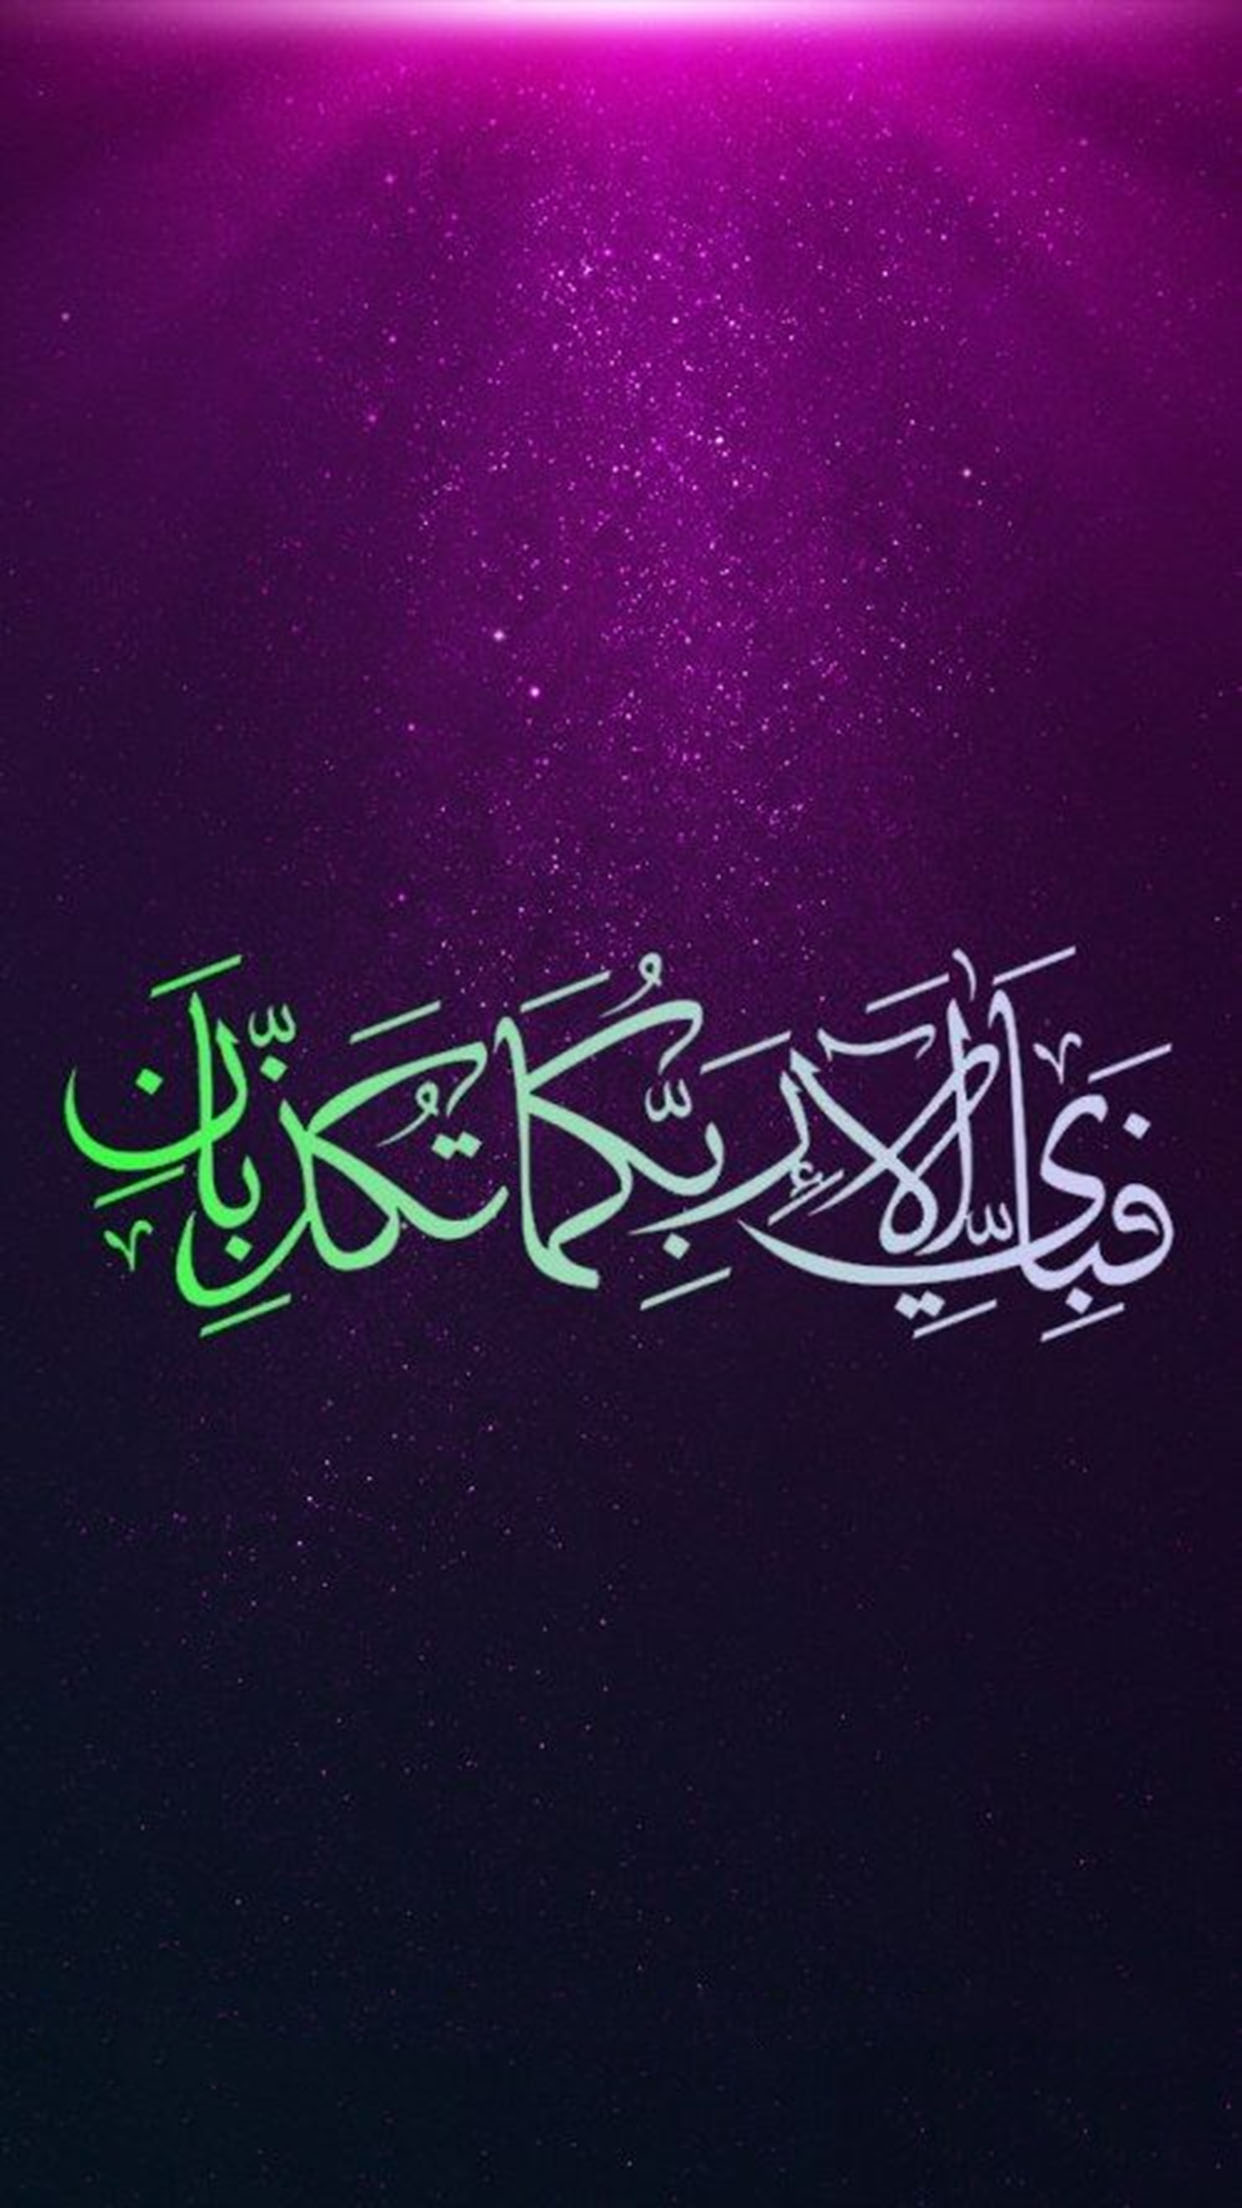 Arabic calligraphy 3 Wallpaper for iPhone Pro Max, X, 6